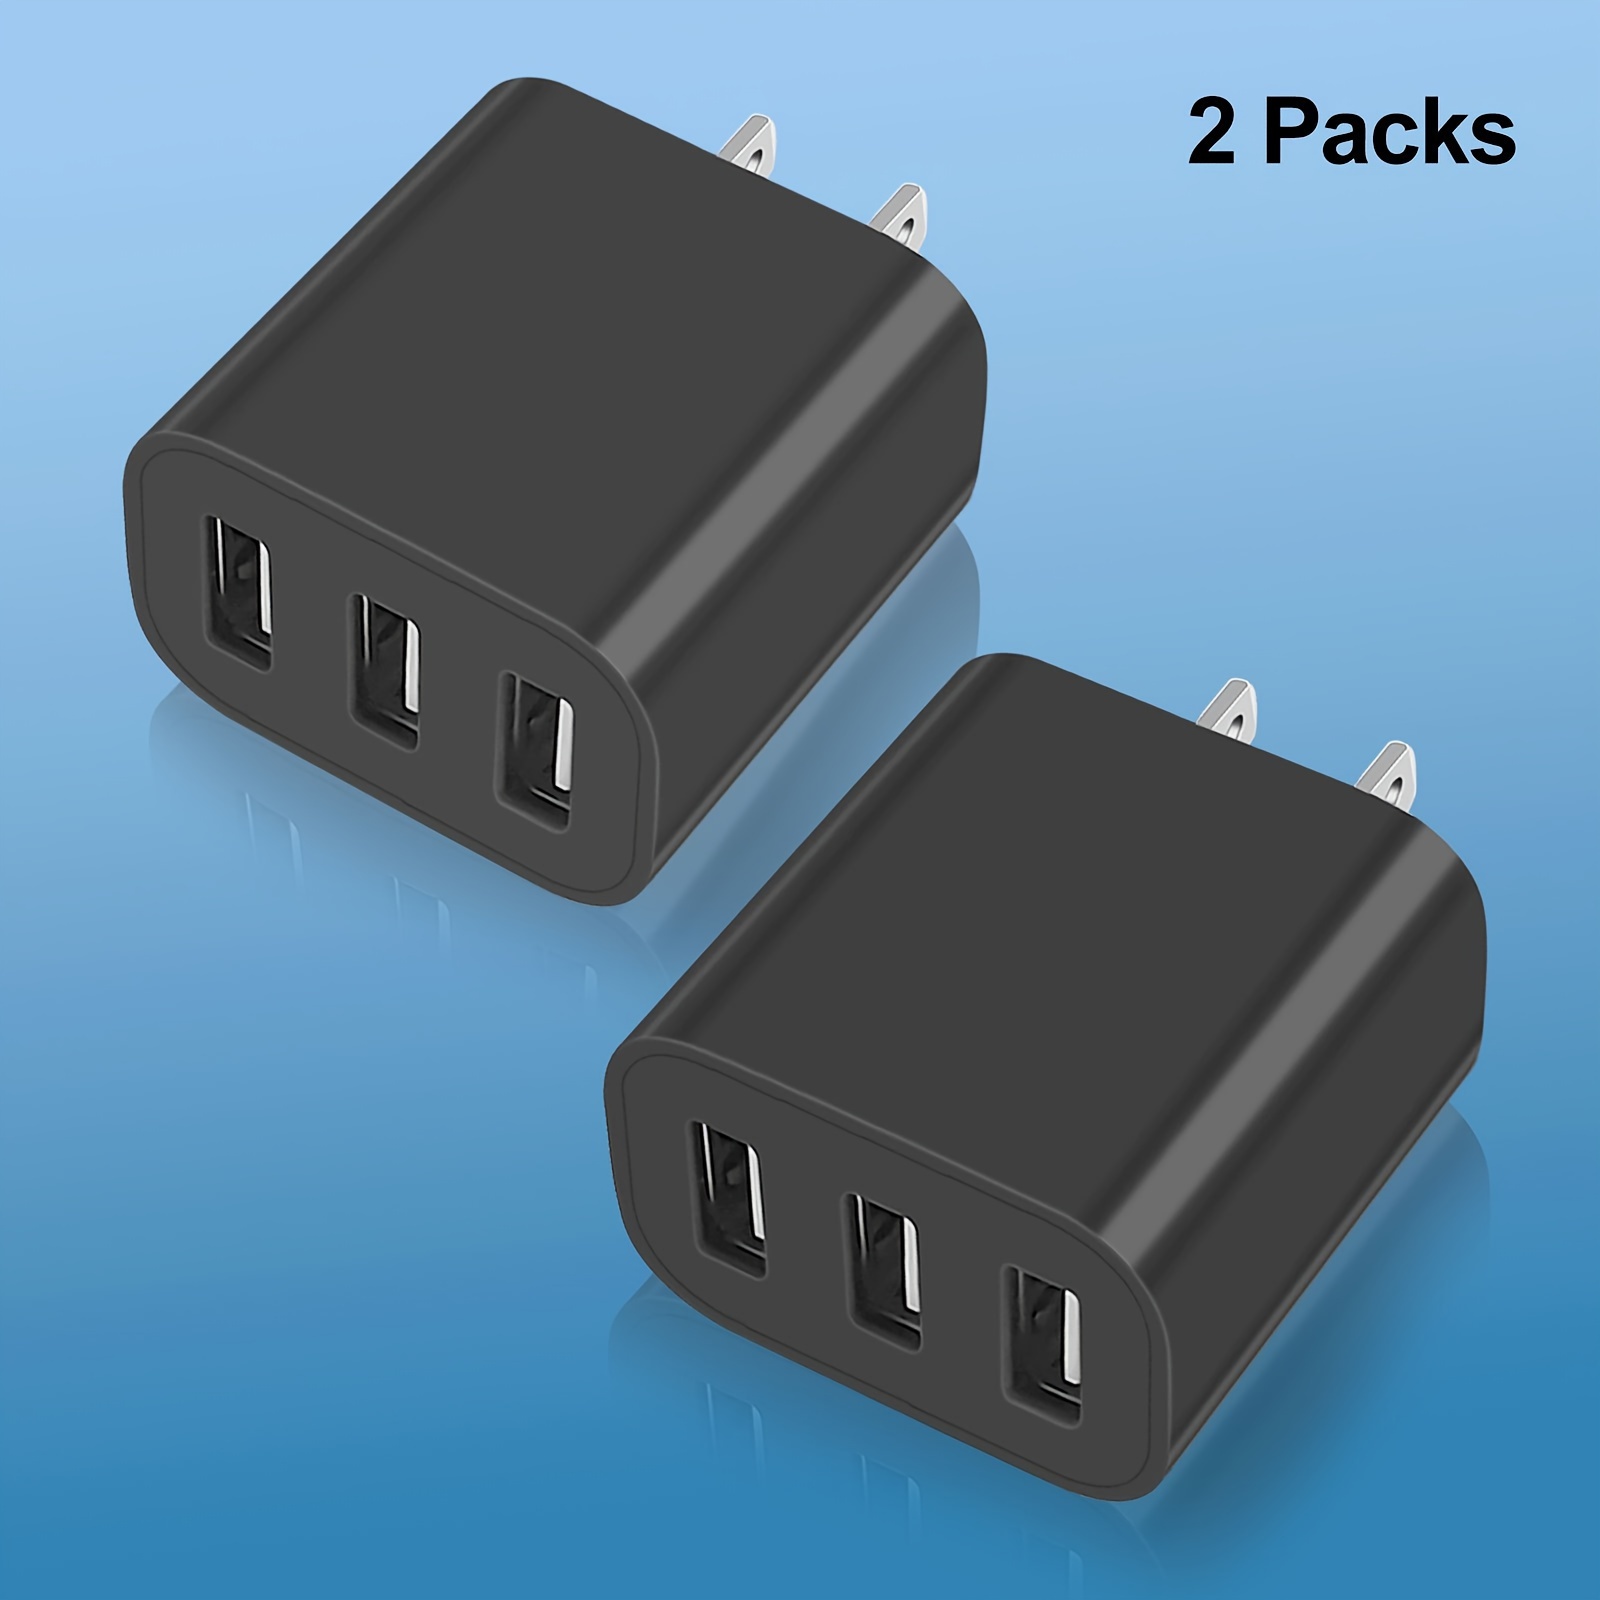 

2 Pcs Usb Wall Charger, Charger Adapter, 3 Ports Quick Charger Plug Cube For 11/12/13/14/15 Pro Max, For Galaxy S22/s21/s20 Power Block Fast Charging Box Brick.